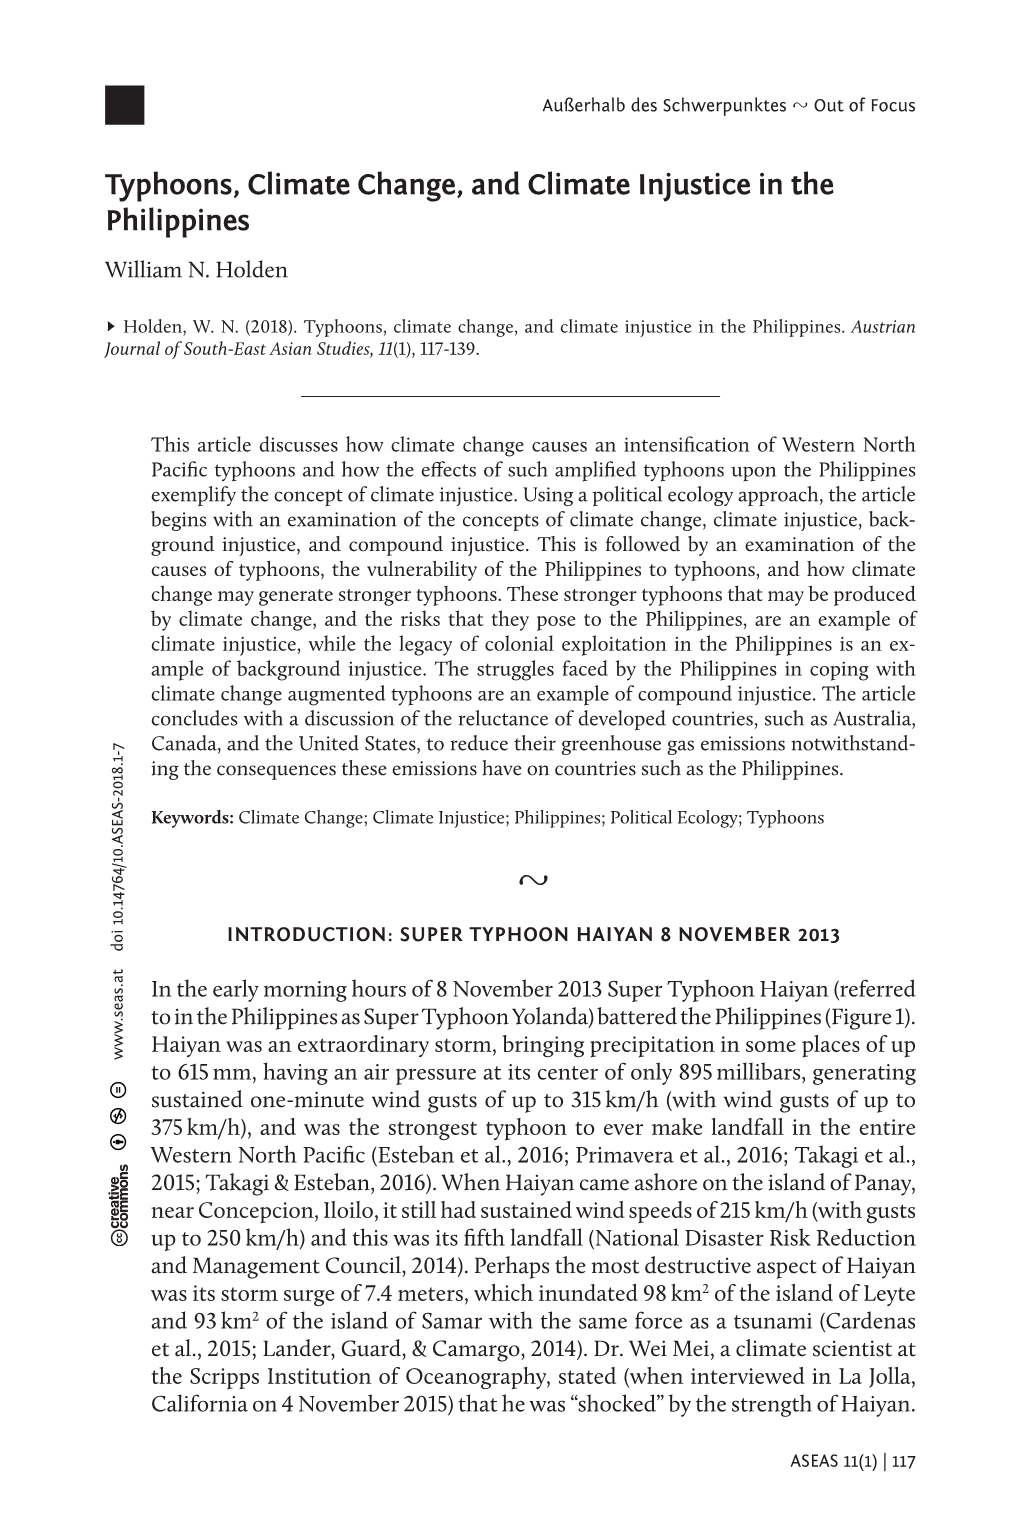 Typhoons, Climate Change, and Climate Injustice in the Philippines William N